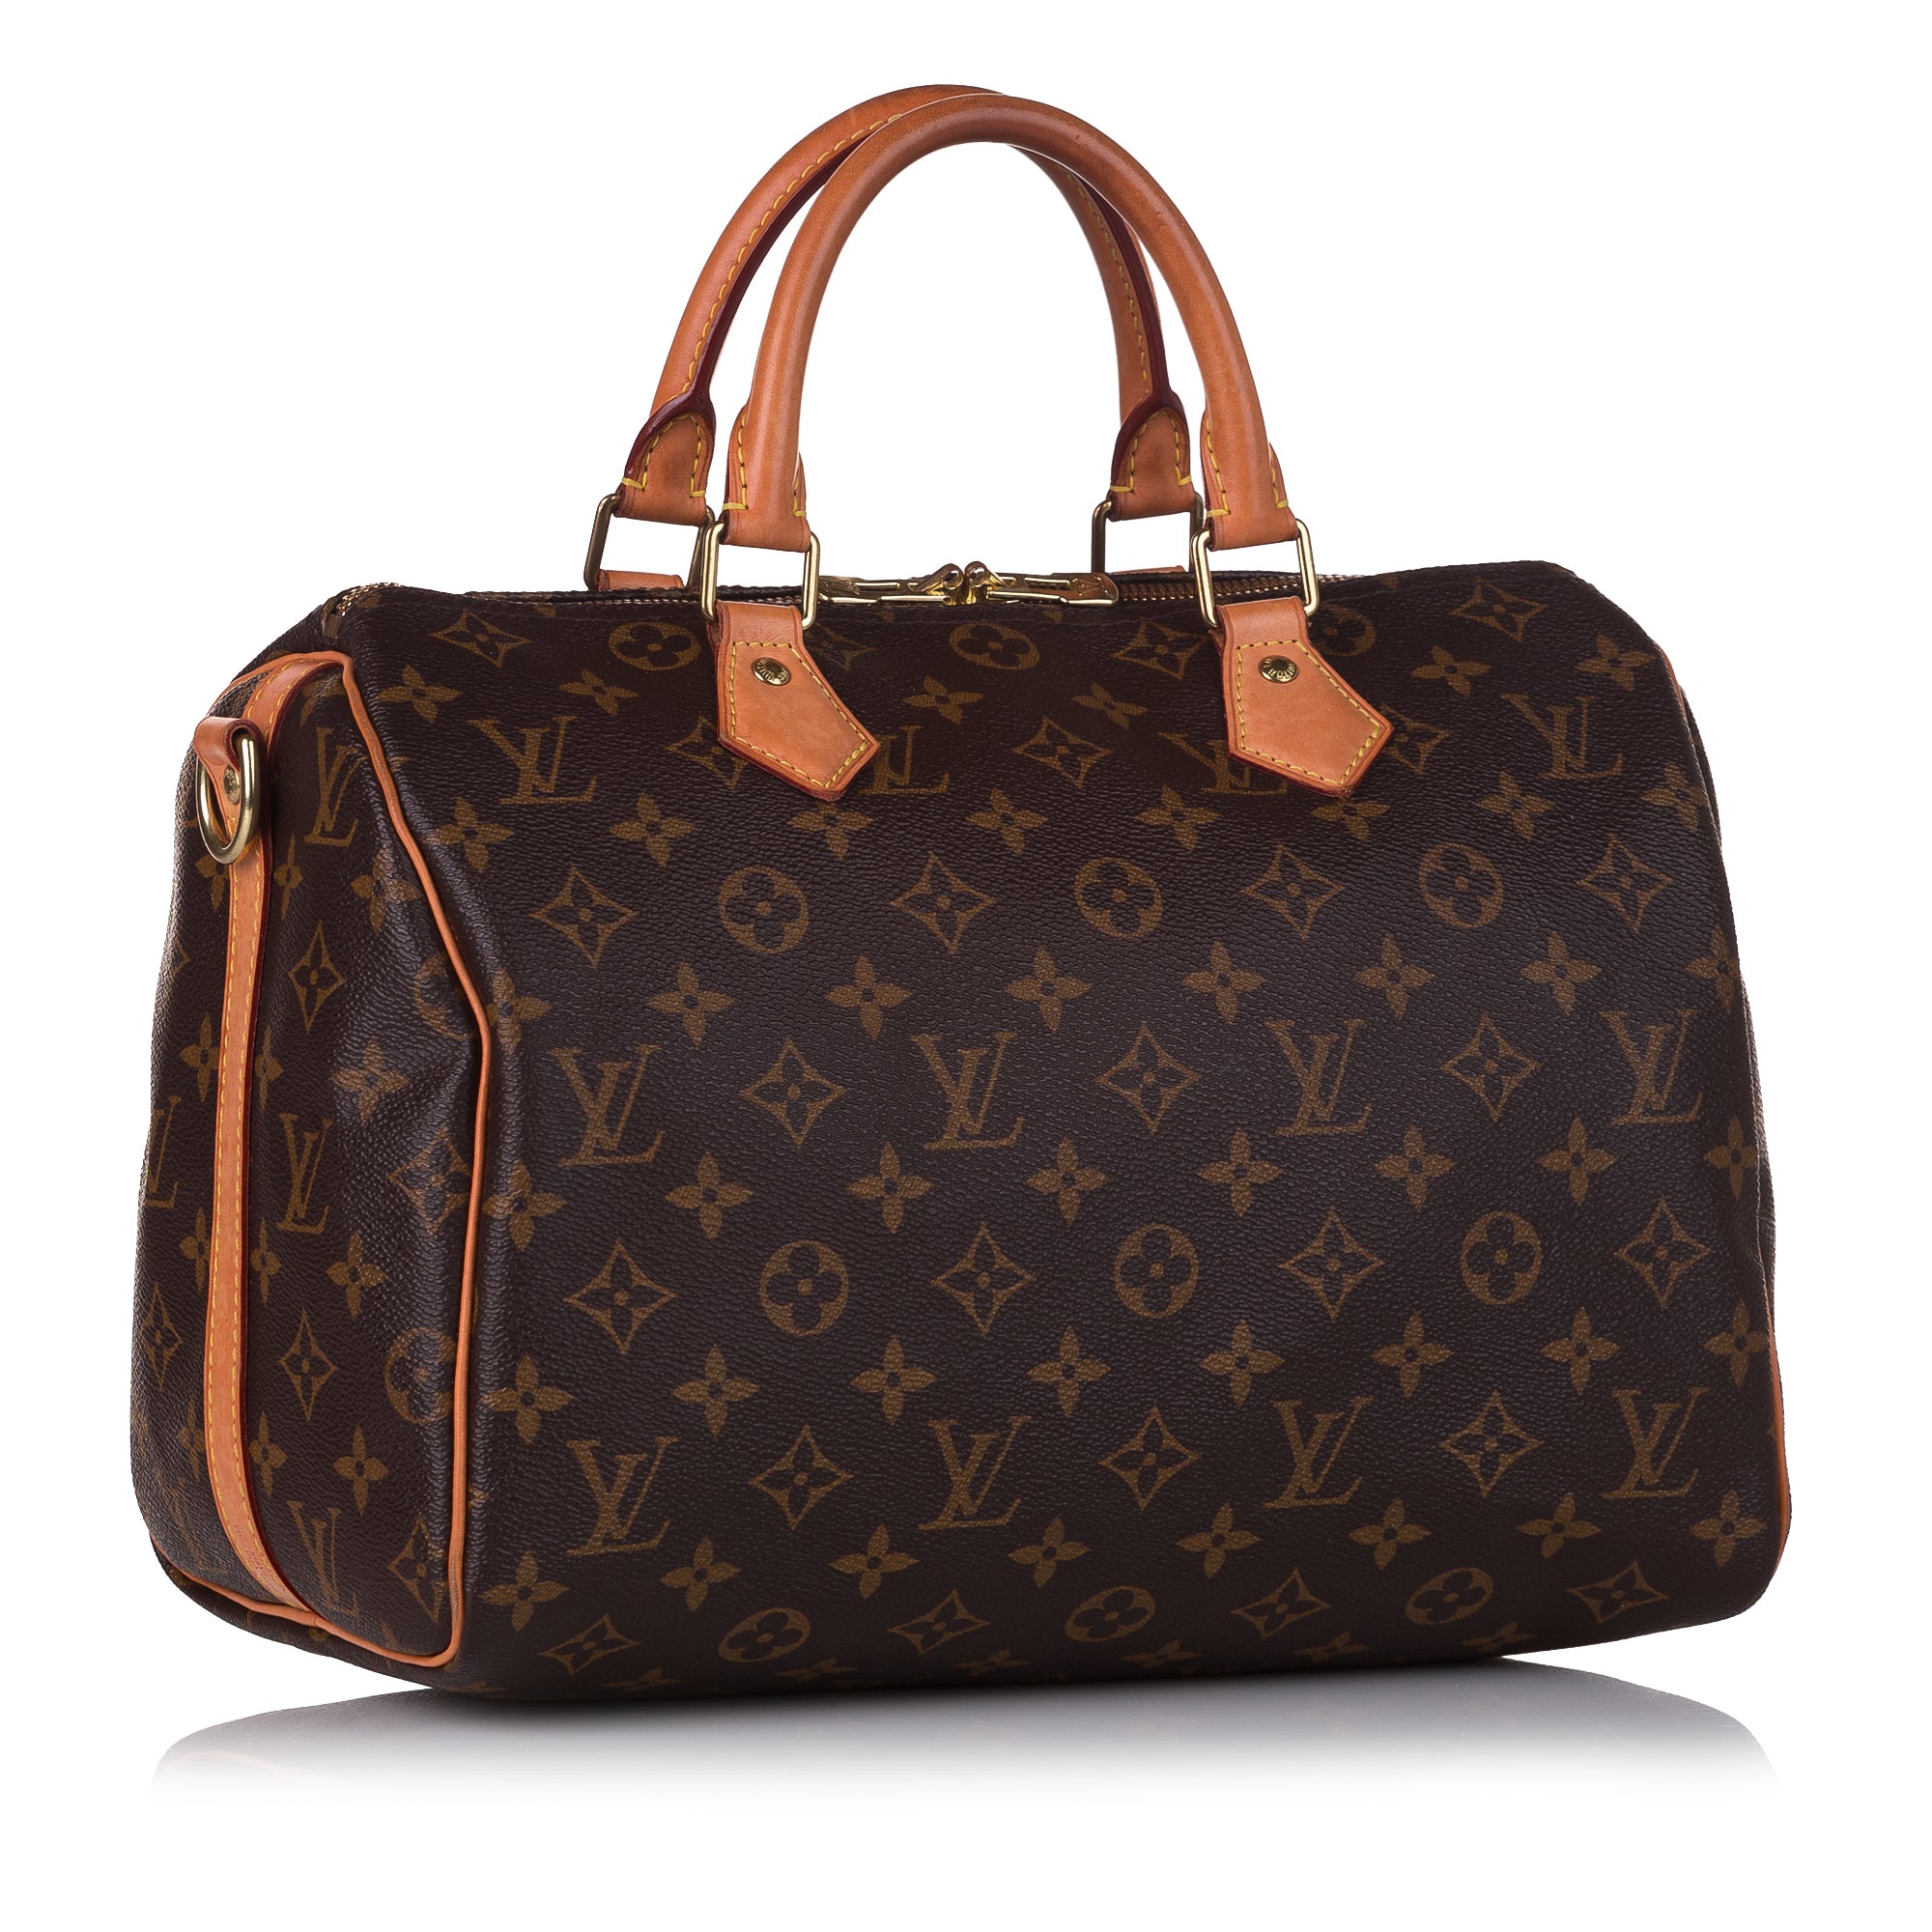 Louis Vuitton Speedy Bandouliere 30 Price Listed